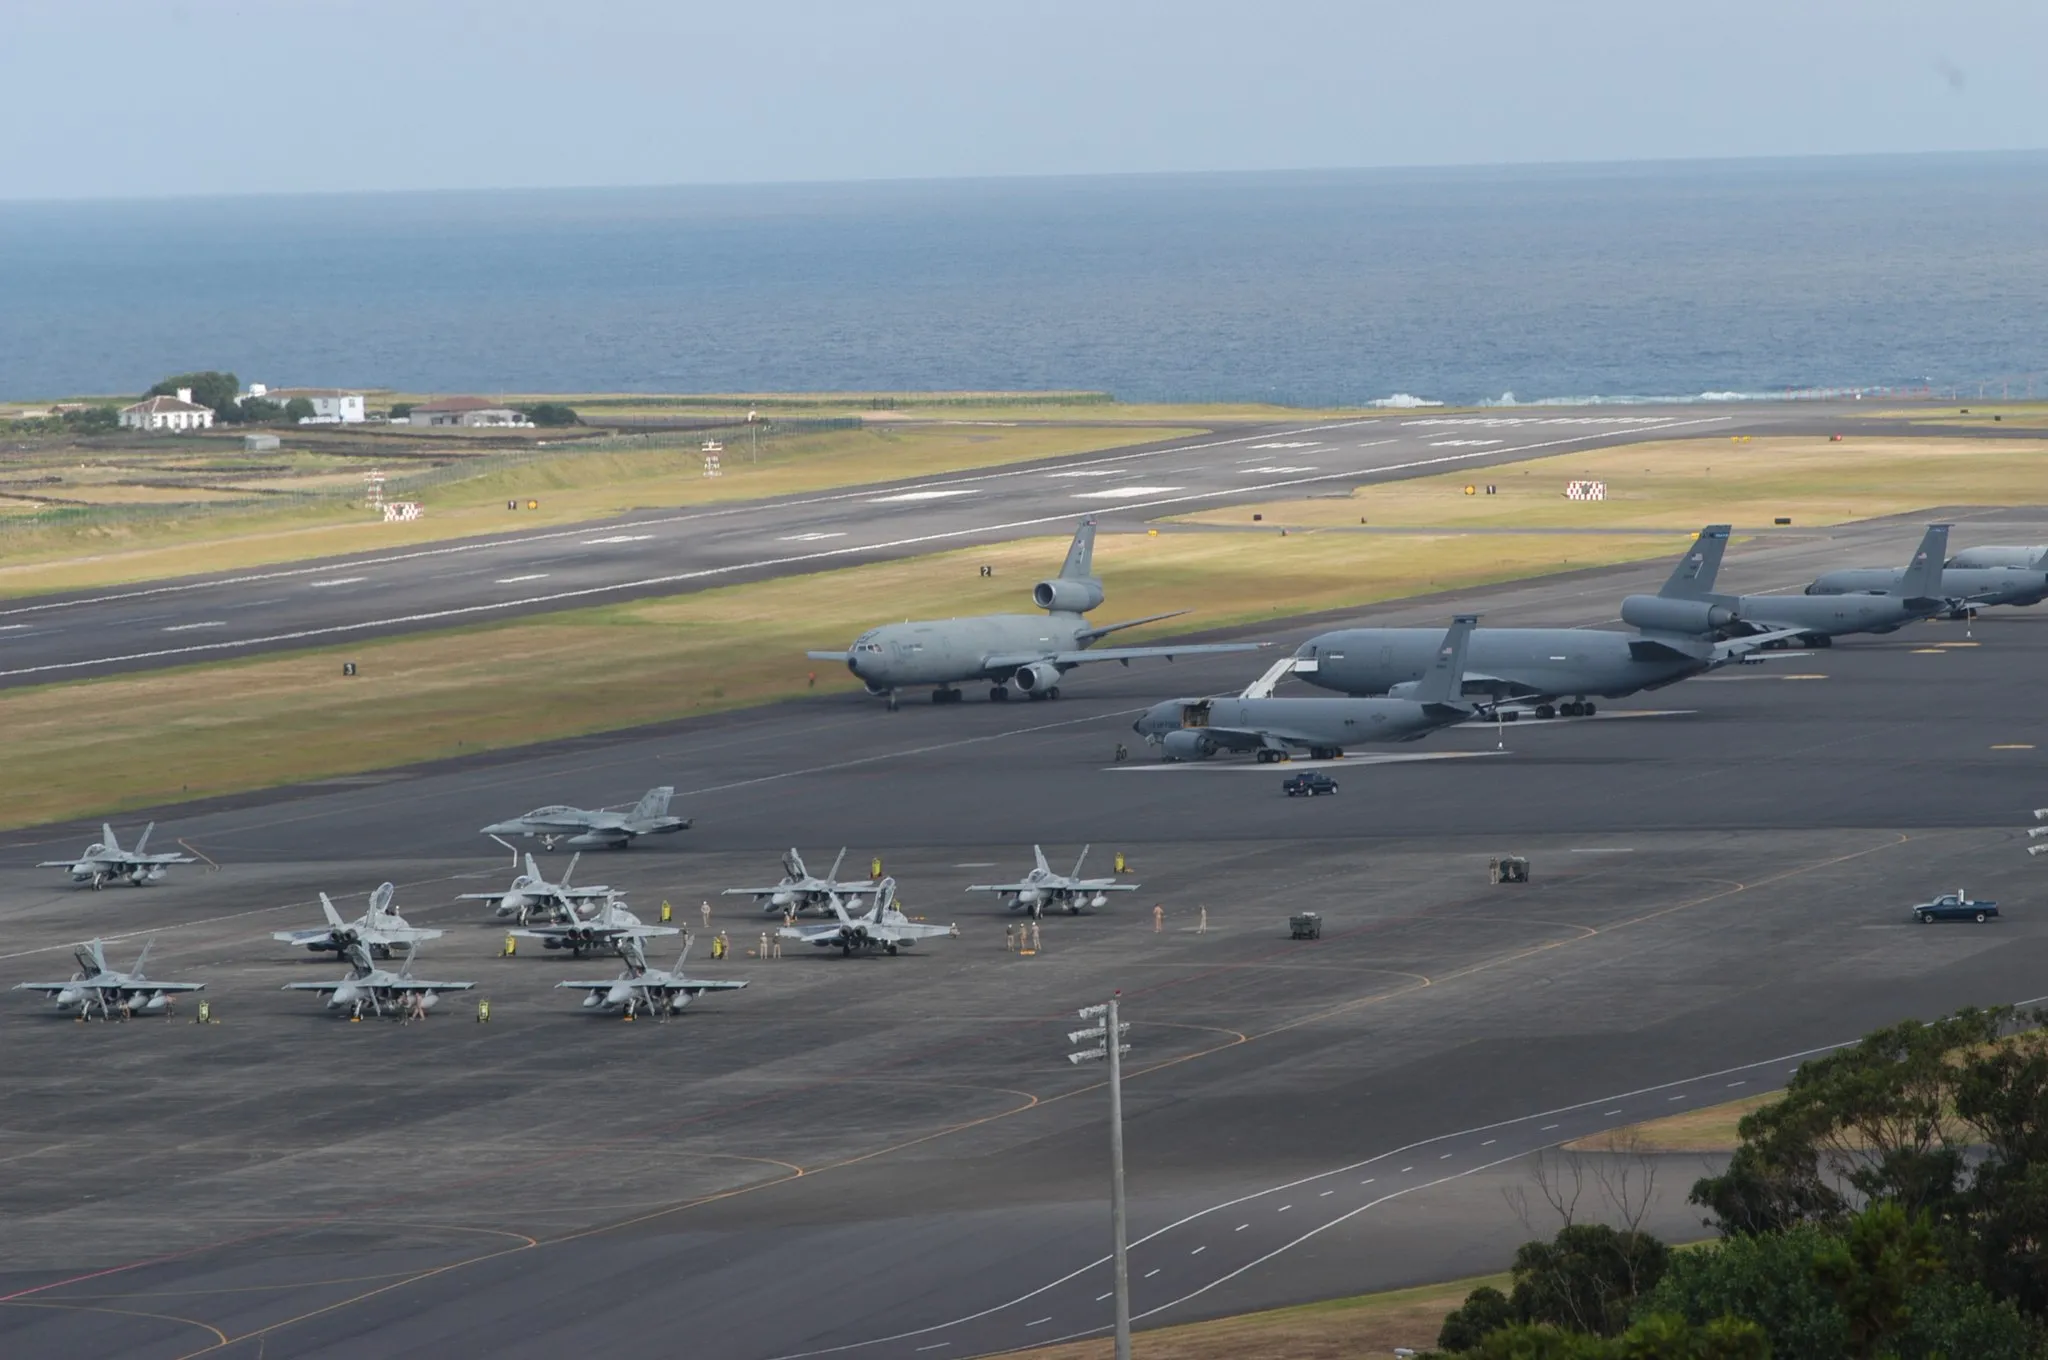 Photo showing: en:Lajes Field, en:Terceira Island, en:Azores, en:Portugal KC-135, KC-10 and F/A-18 aircraft on the tarmac.  The 65th Air Base Wing is the American unit stationed at Lajes Field and it is the largest U.S. military organization in the Azores. The wing provides base and en route support for Department of Defense, allied nations and other authorized aircraft in transit, including those from the Netherlands, Belgium, Canada, France, Italy, Colombia, Germany, Venezuela and Great Britain. source